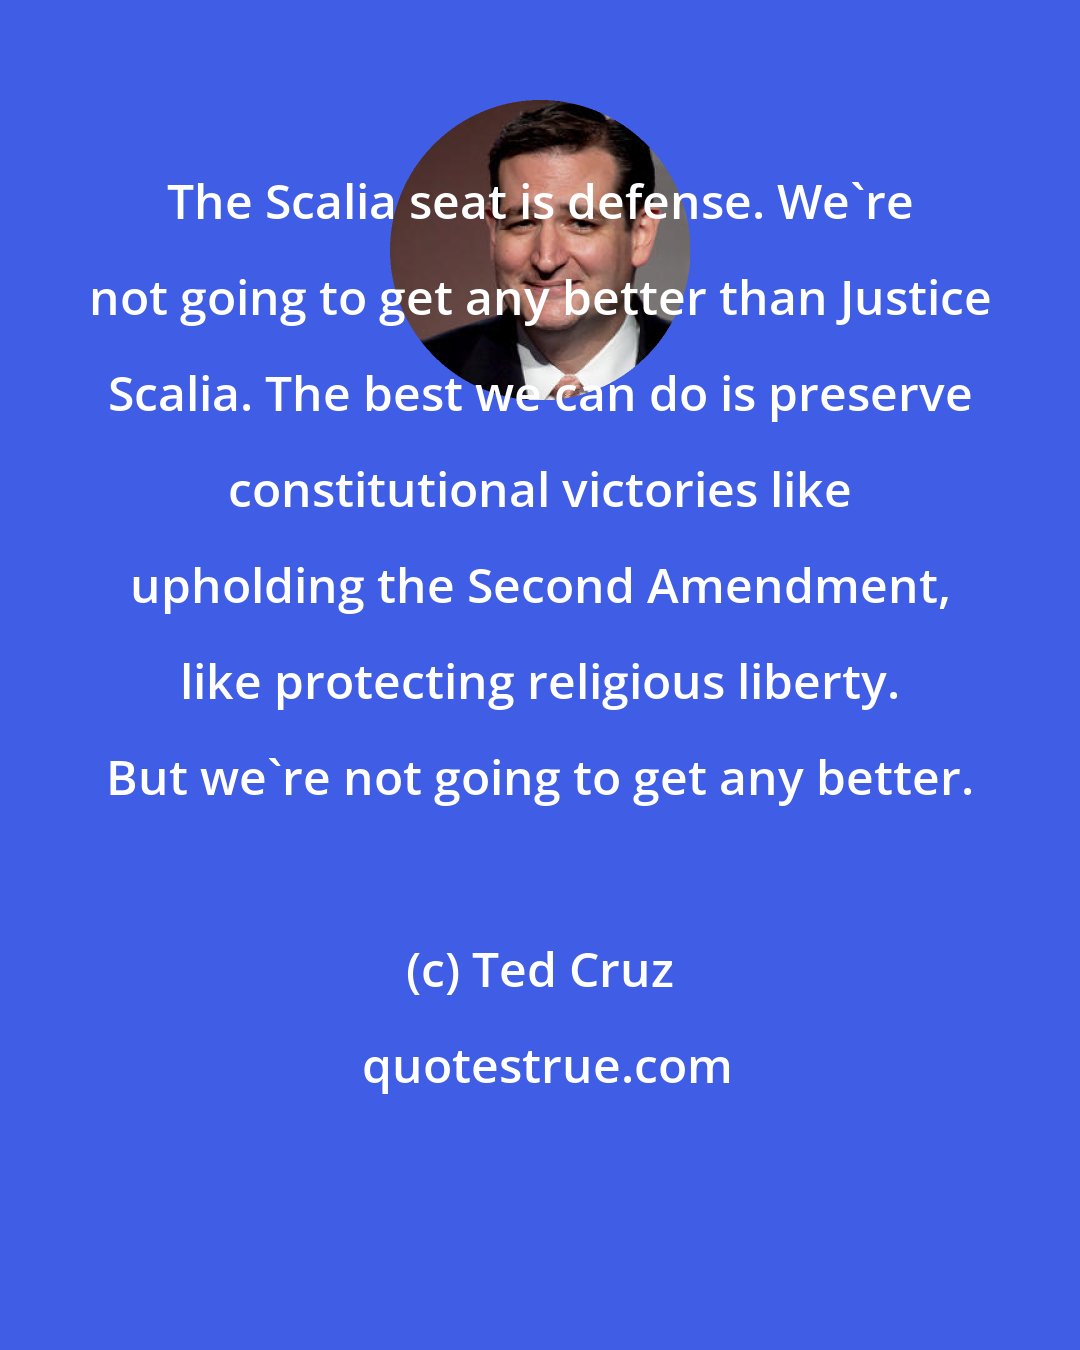 Ted Cruz: The Scalia seat is defense. We're not going to get any better than Justice Scalia. The best we can do is preserve constitutional victories like upholding the Second Amendment, like protecting religious liberty. But we're not going to get any better.